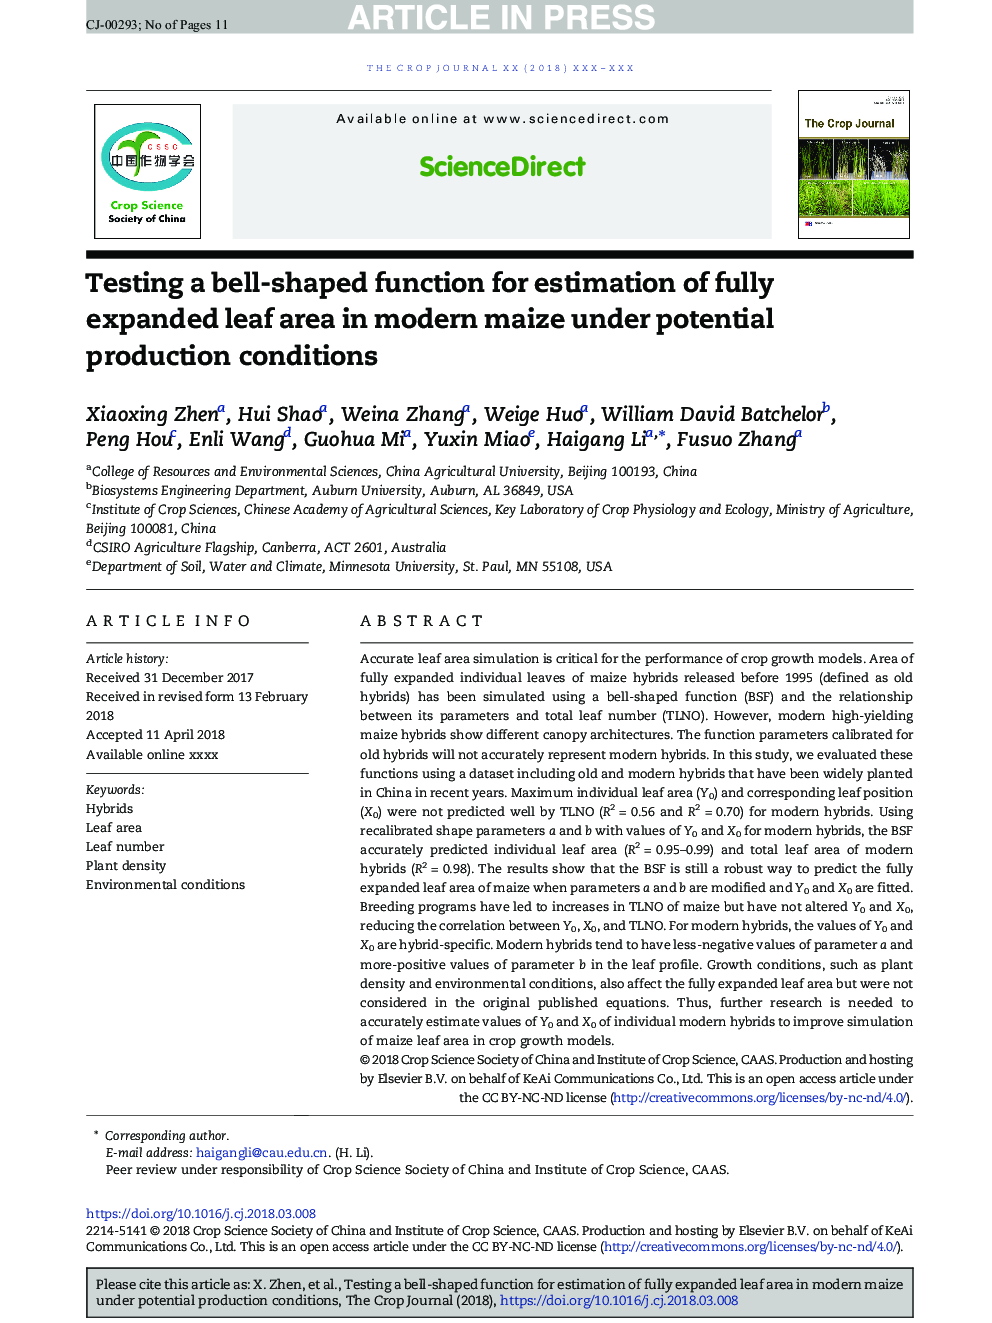 Testing a bell-shaped function for estimation of fully expanded leaf area in modern maize under potential production conditions